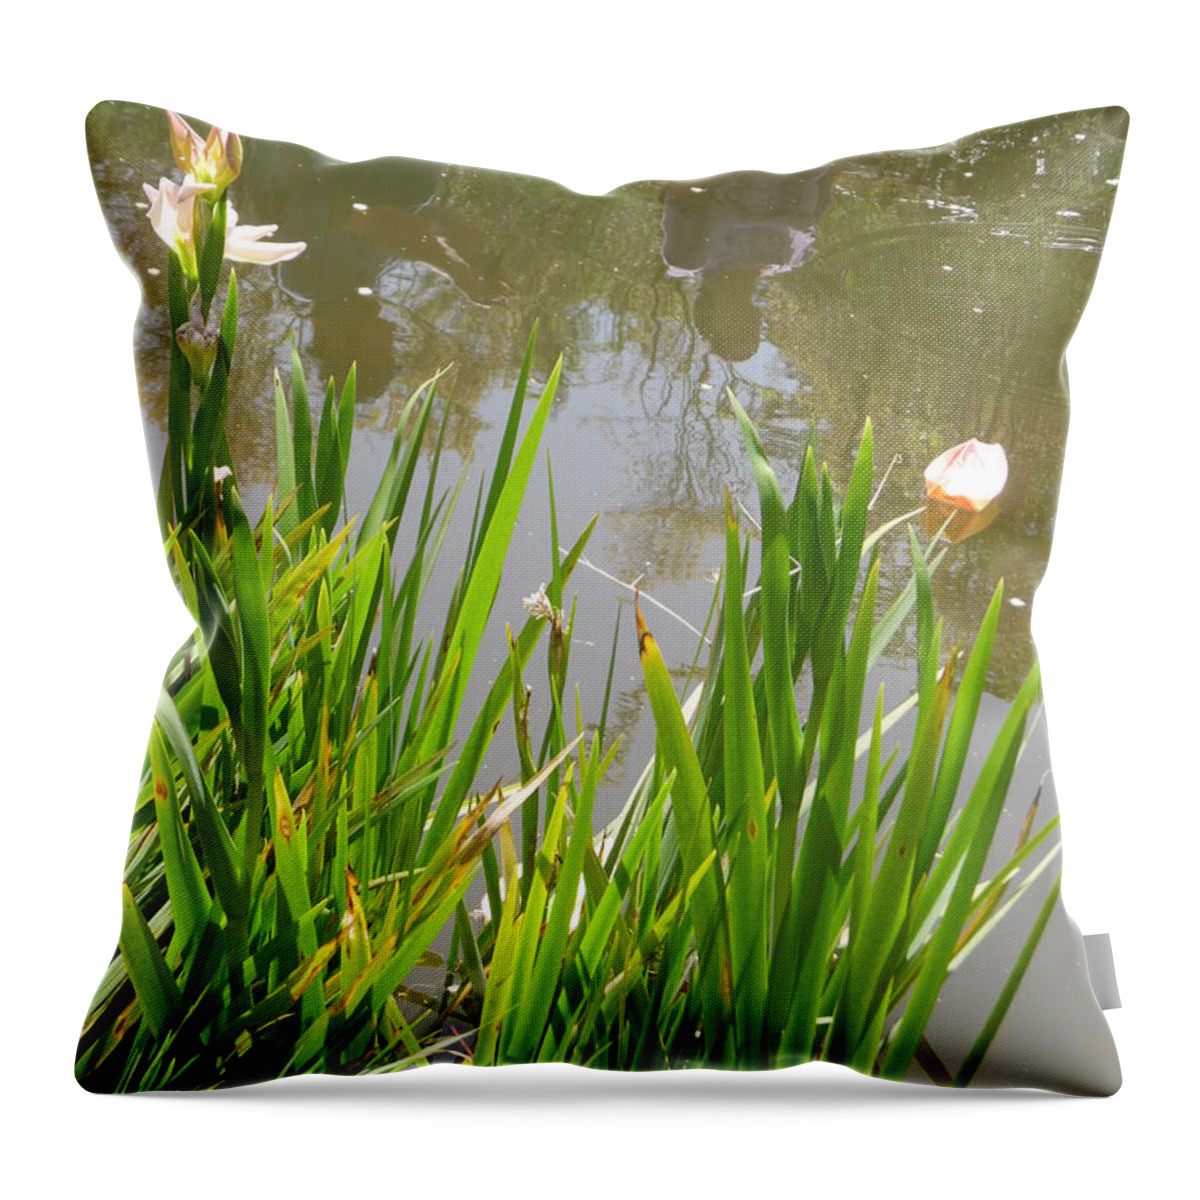 Flowers In The Water Throw Pillow featuring the painting Flowers in the Water by Esther Newman-Cohen